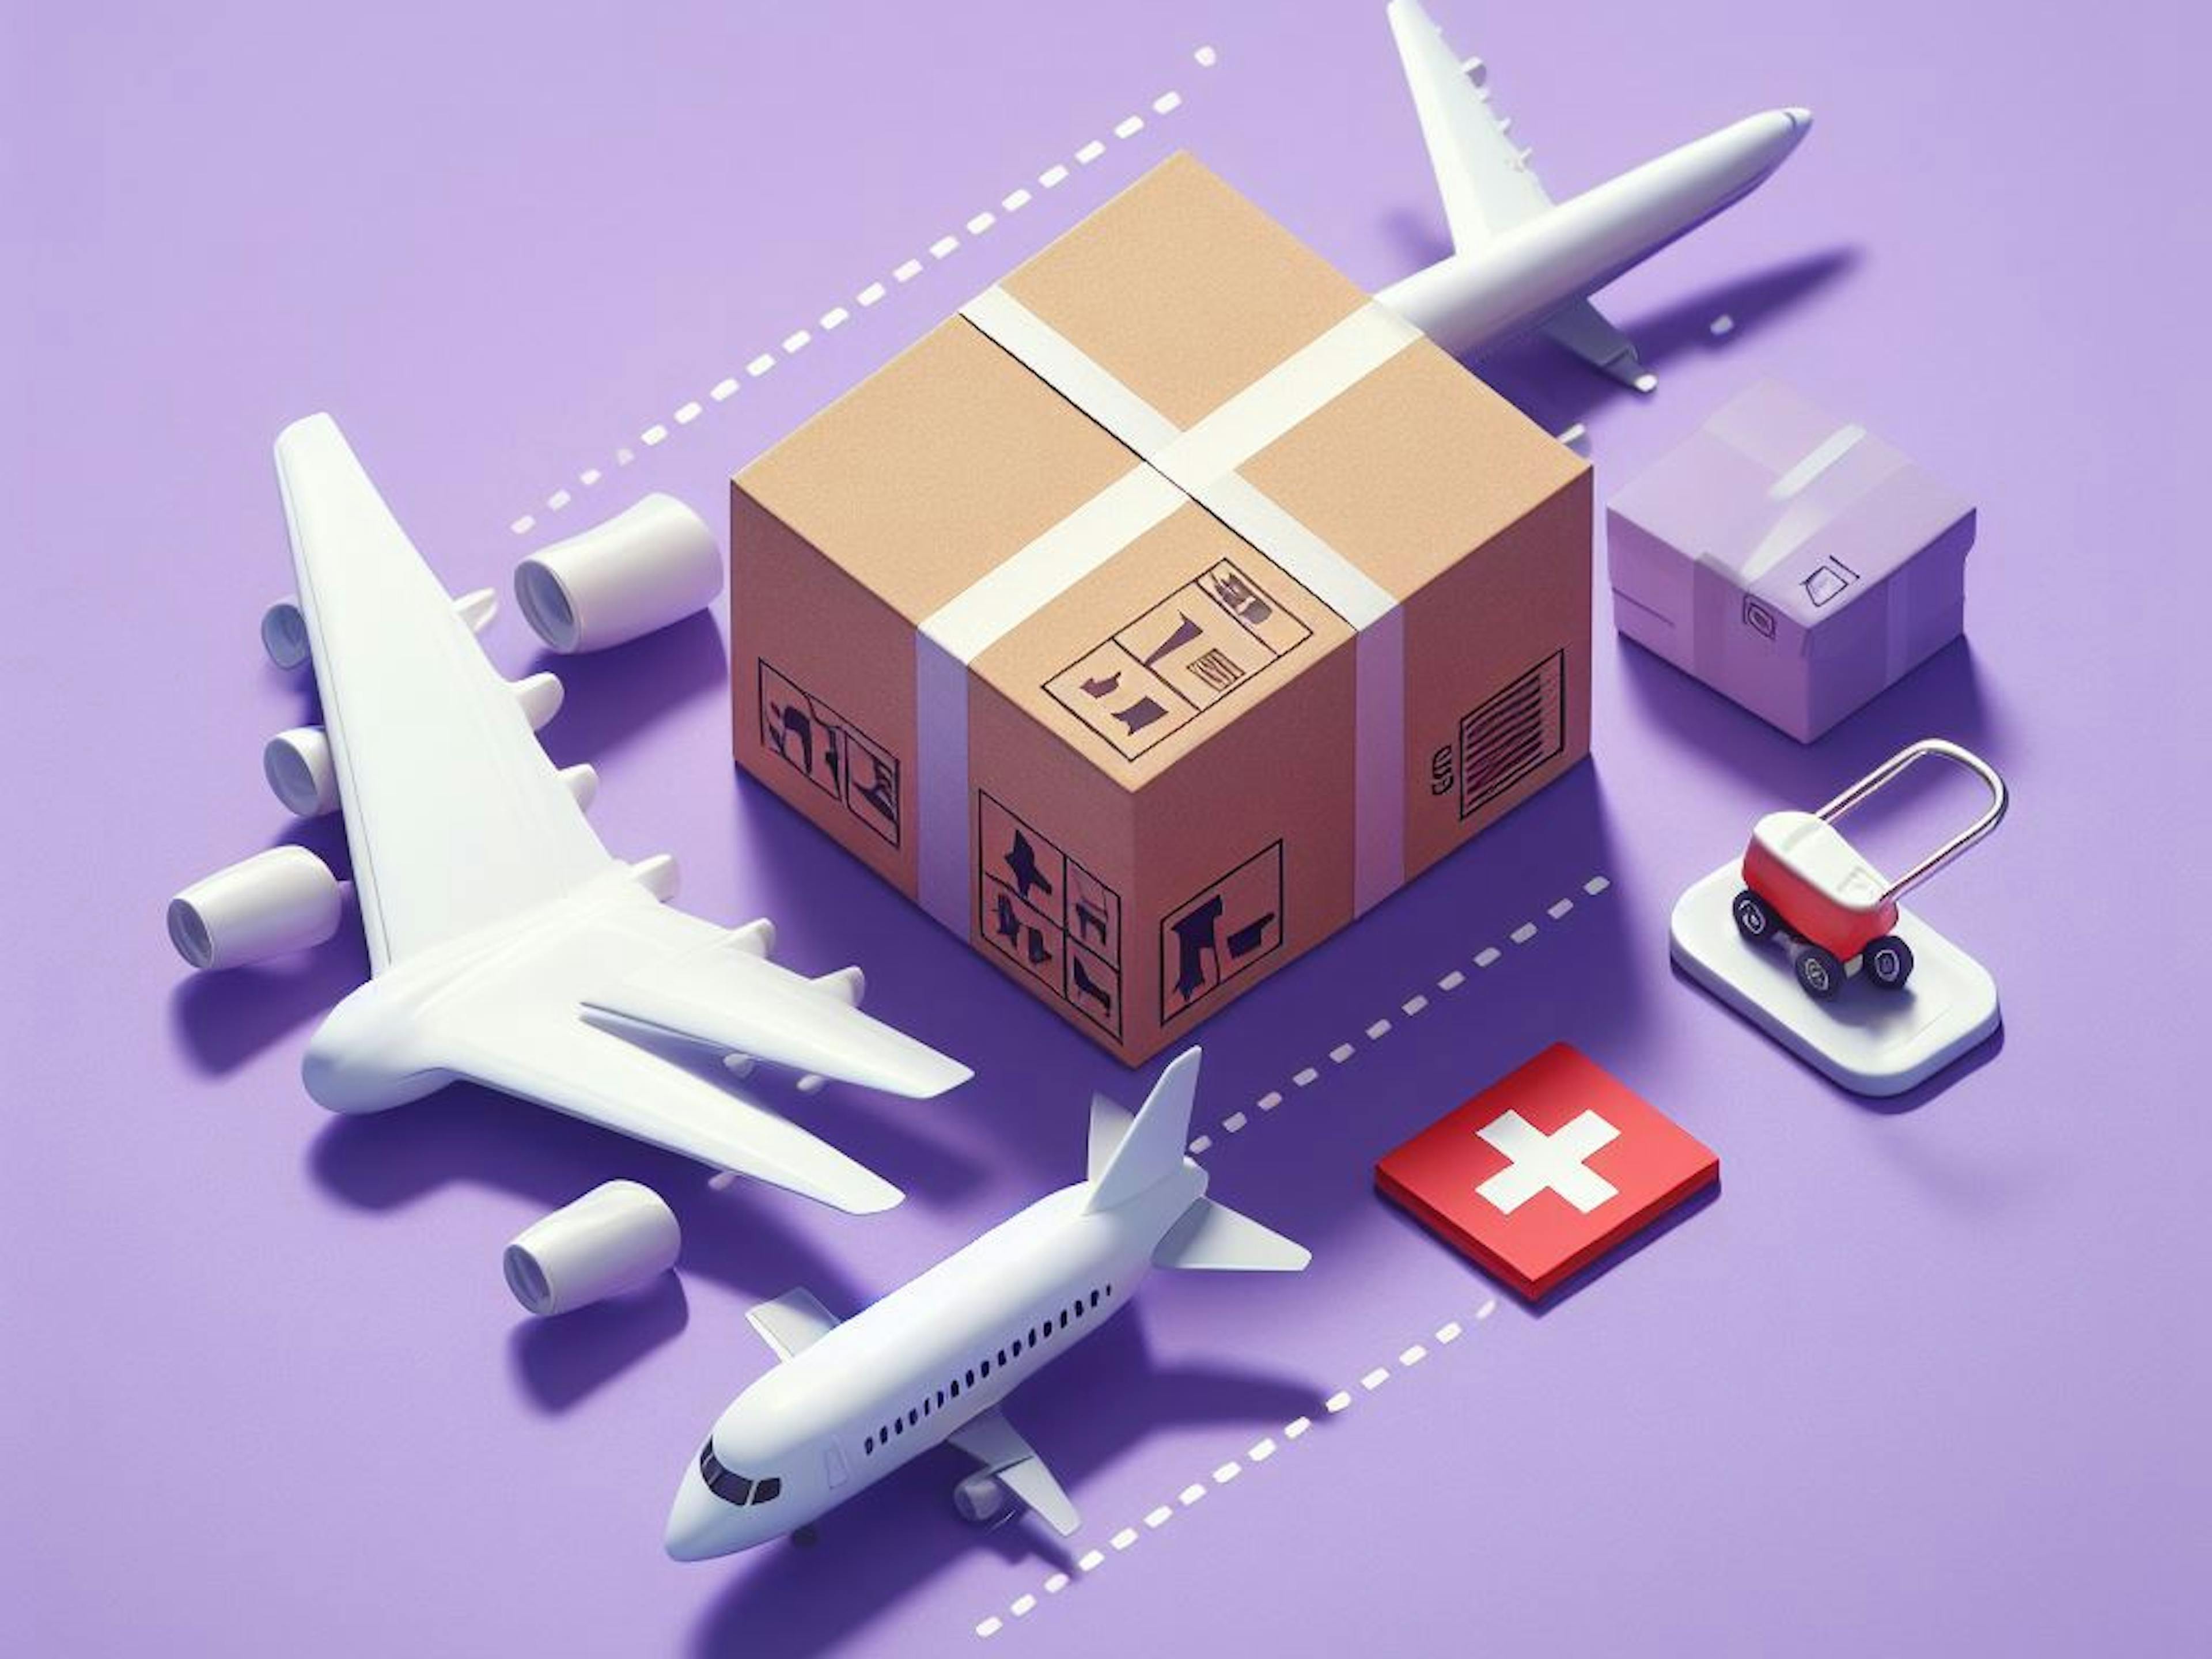 A package in the middle of airplanes to be shipped at Switzerland